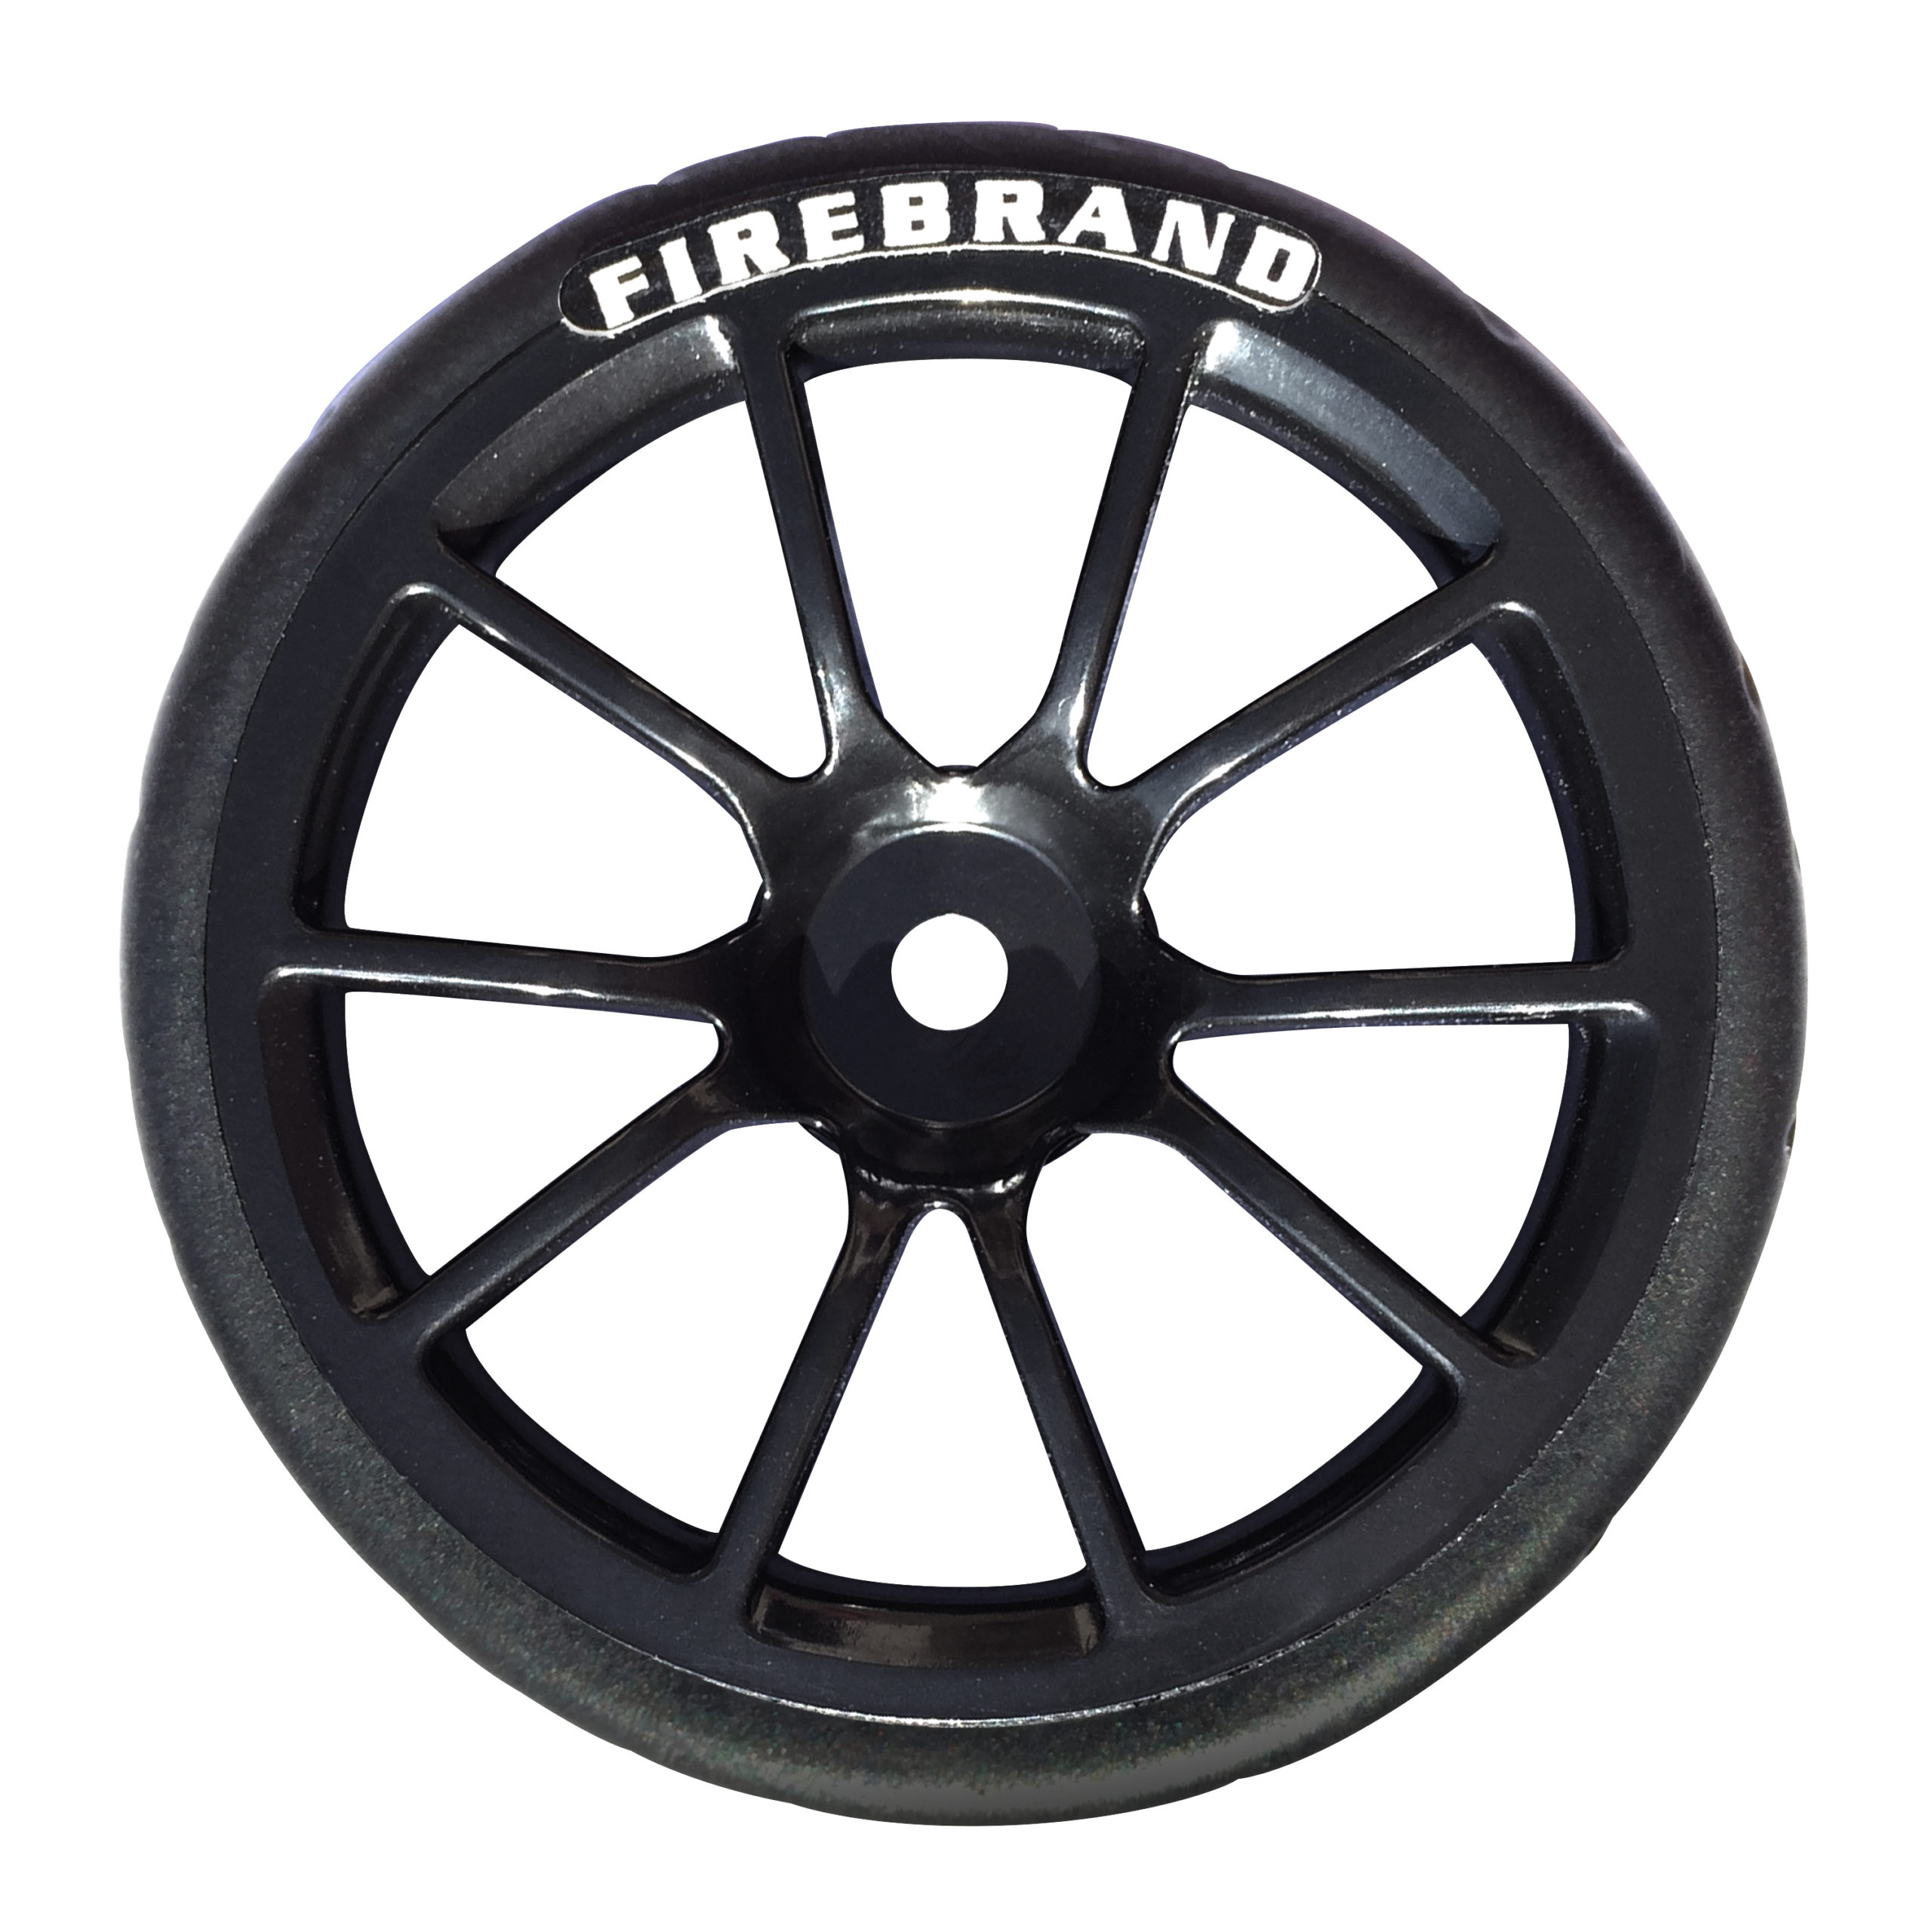 ON-ROAD Race Wheels in Galaxy Black with ENFORCER ST 1: 8 SCALE FireBrand RC • KING-PIN Set of 4 On-road Race/ Bash STREET TREADS